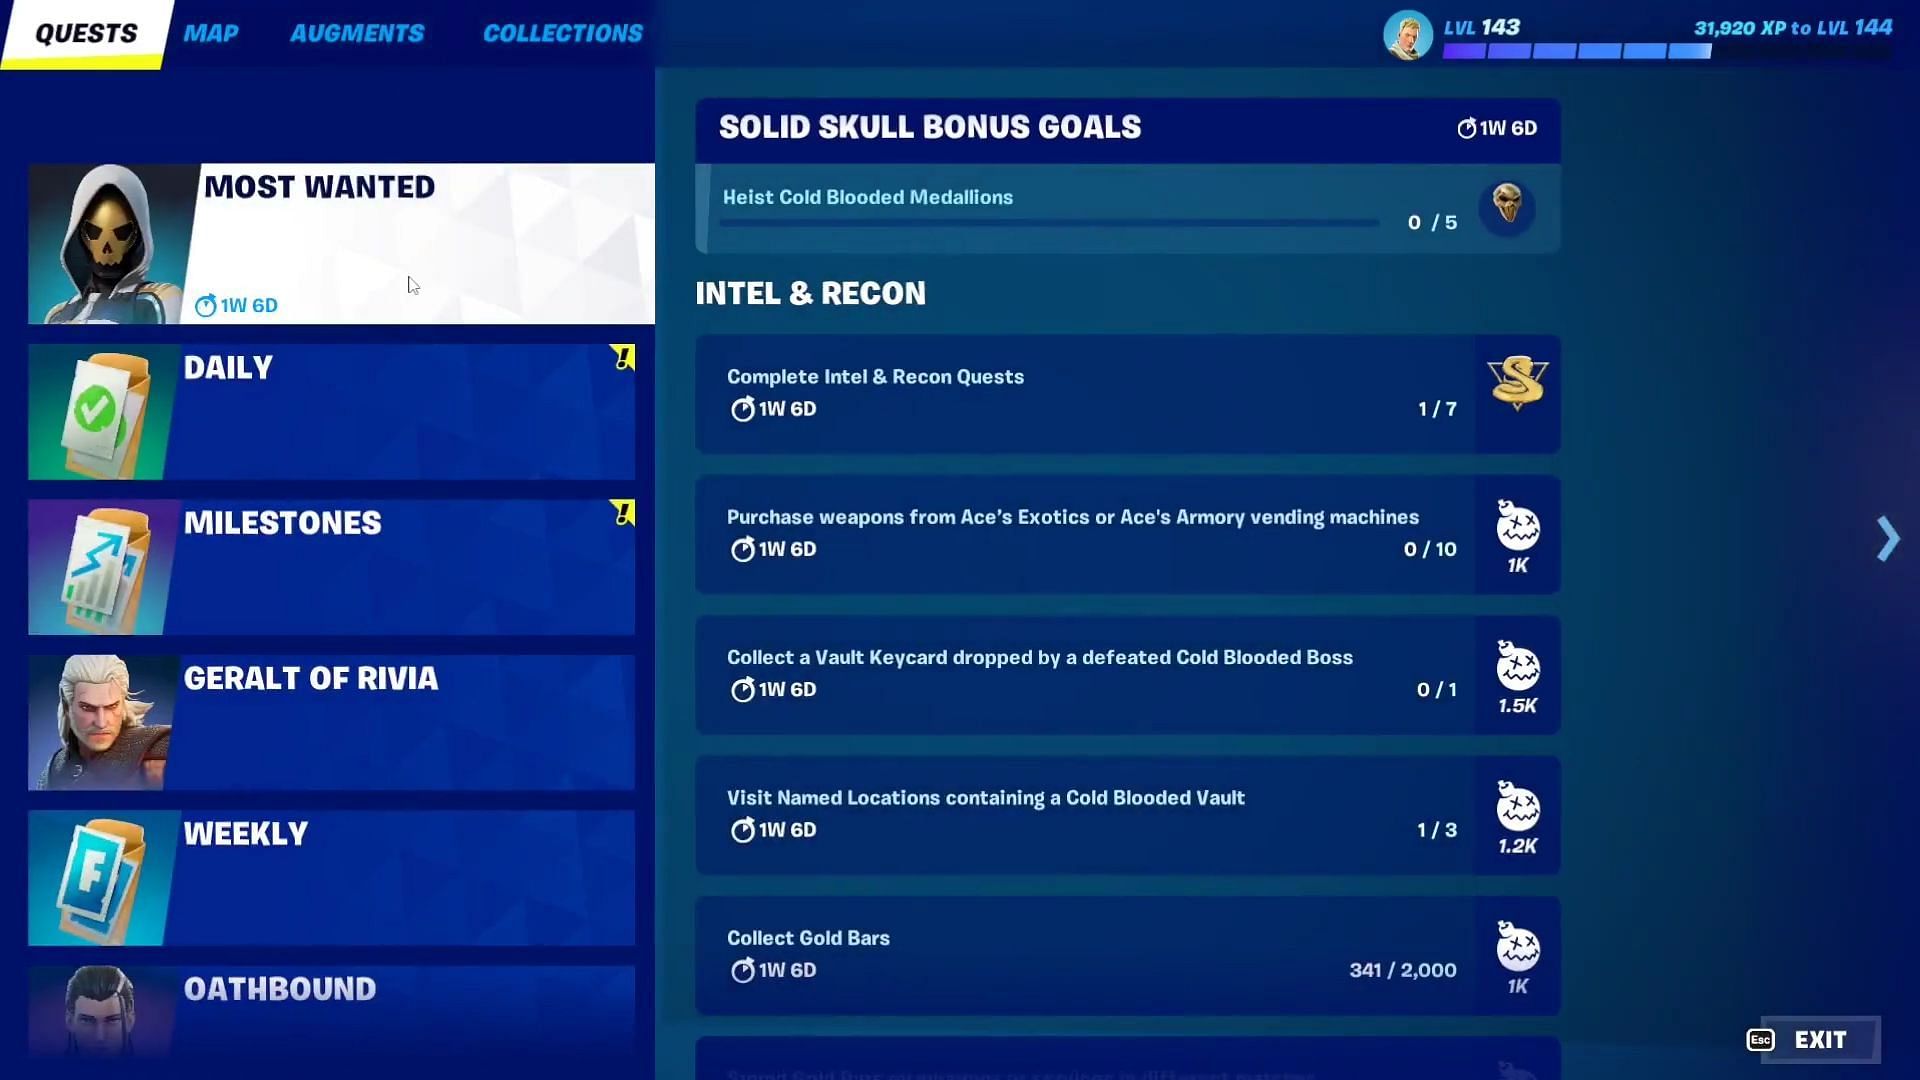 The Fortnite Solid Skull back bling is part of the Most Wanted event (Image via Epic Games)